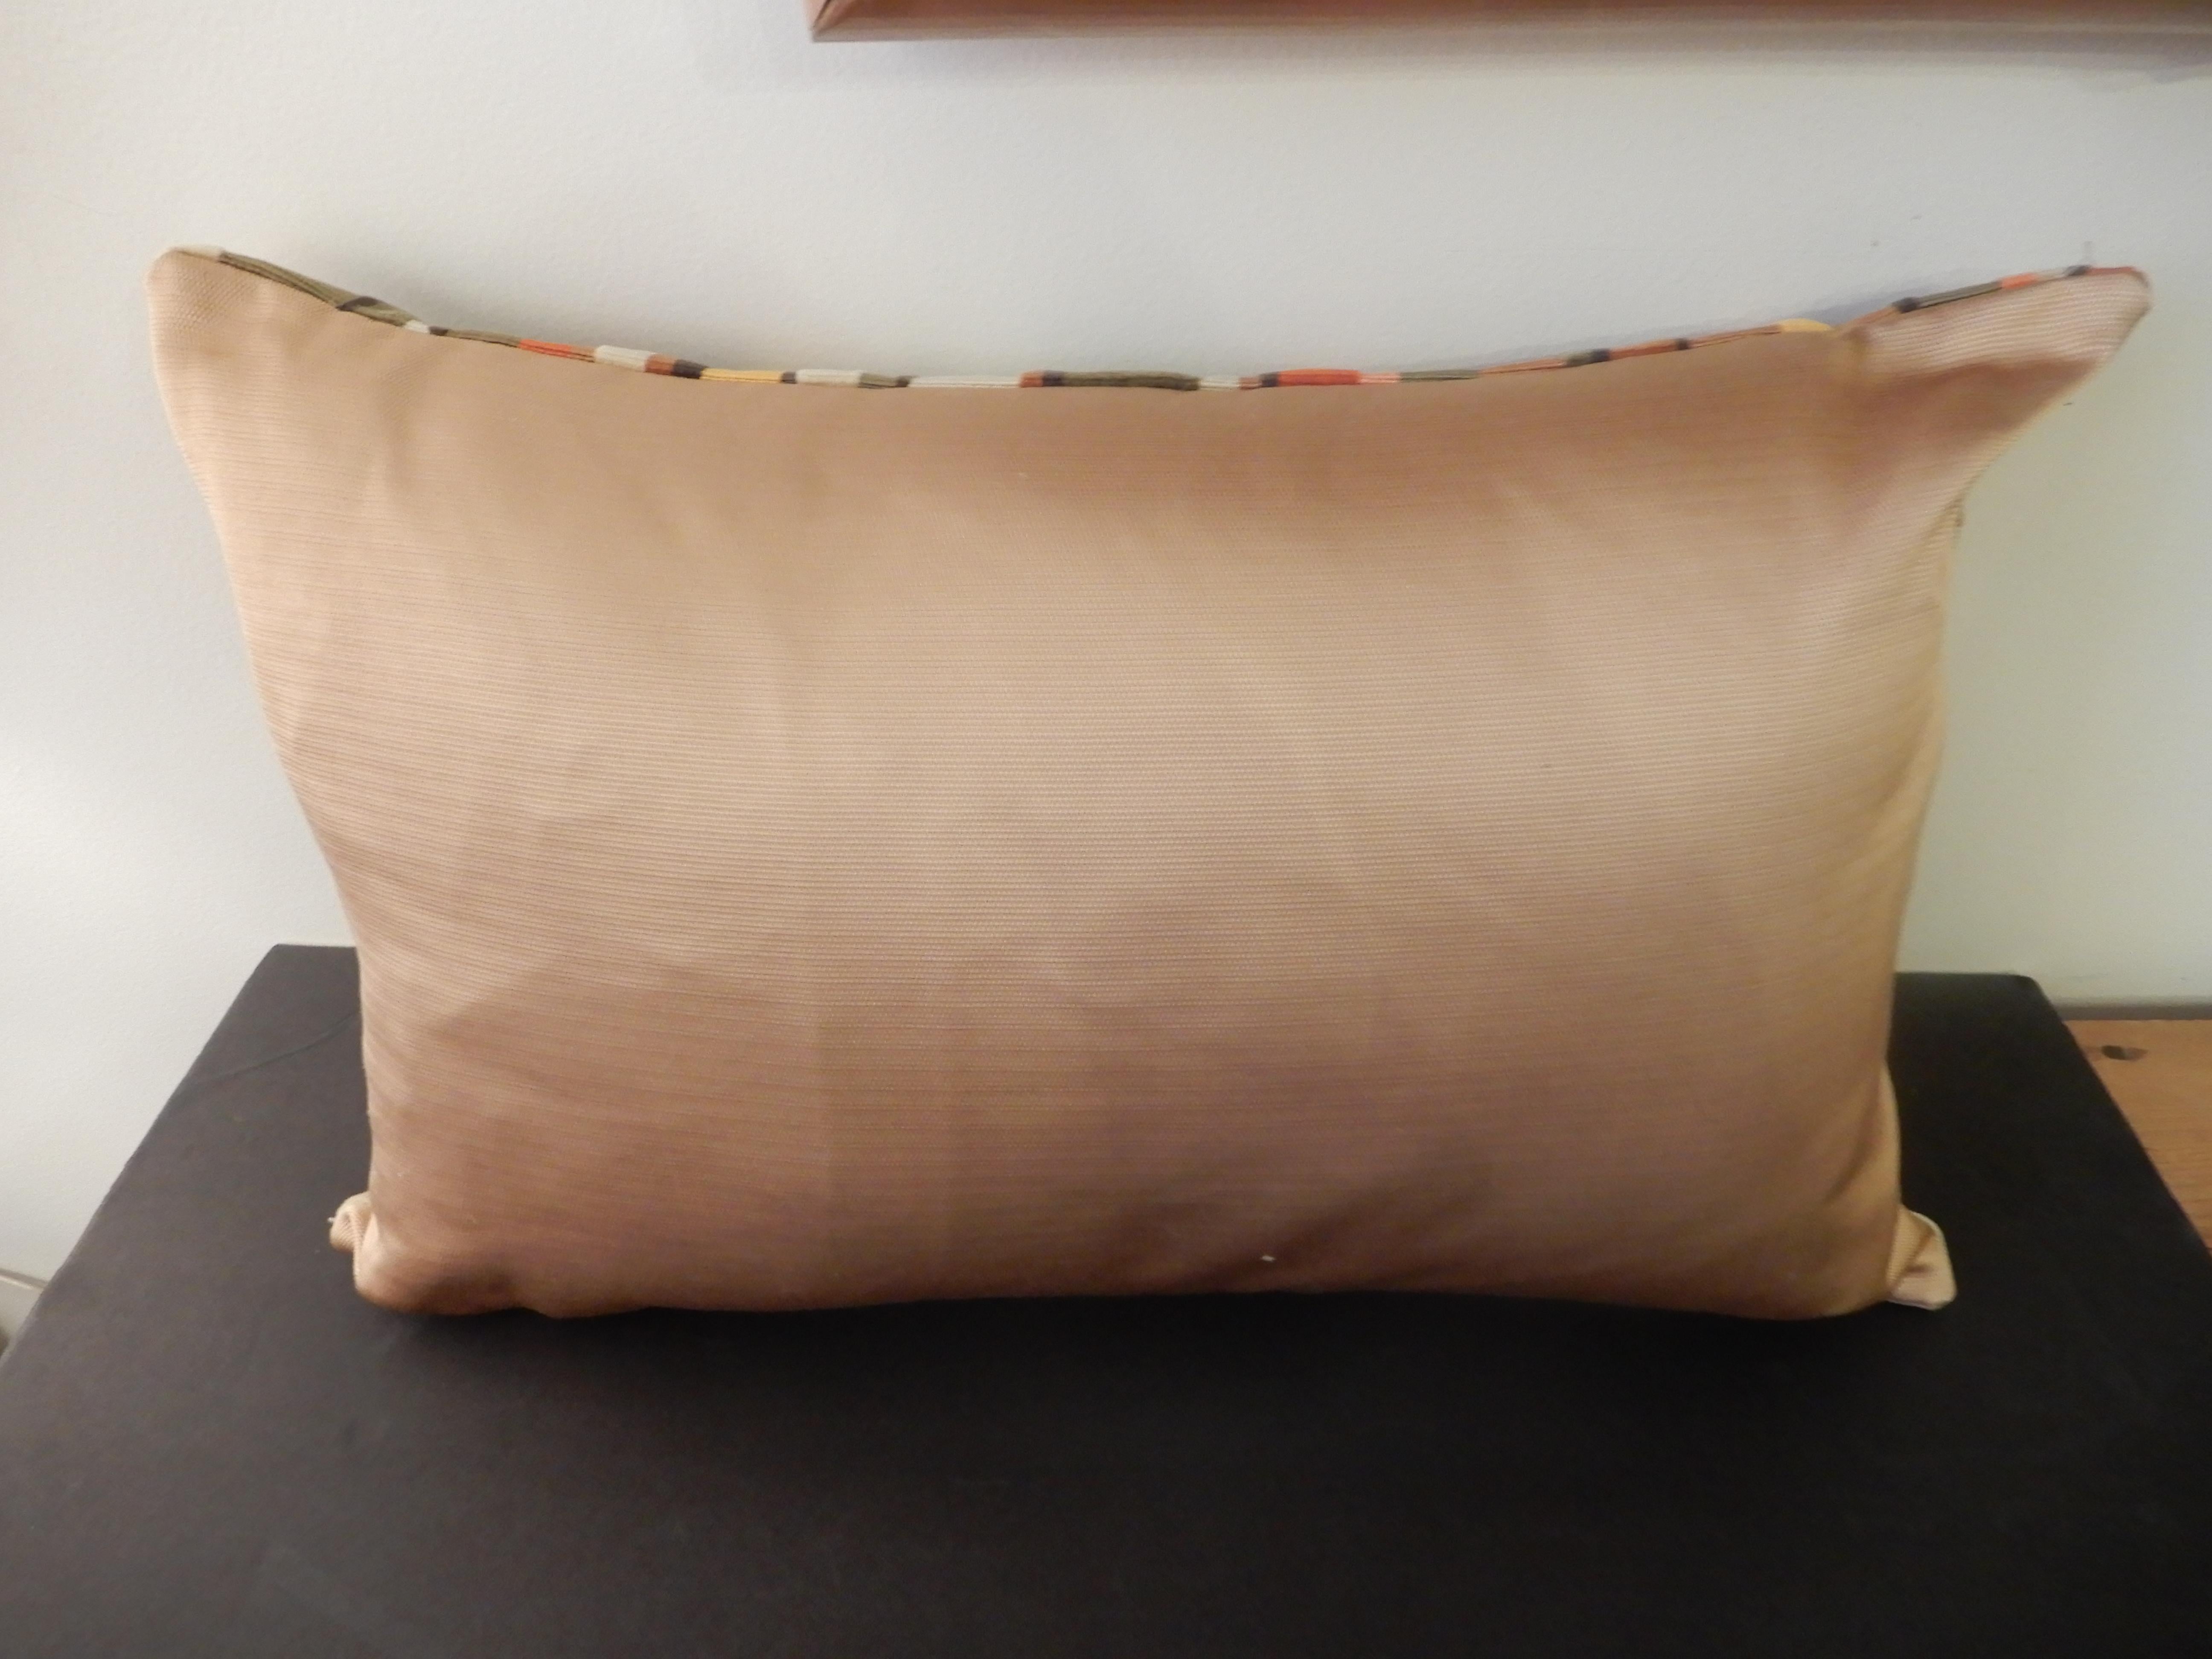 Two custom made corded velvet lumbar pillows, goose down filled.,Backed with an antique gold corded satin fabric. Sold per piece 275.00 each.